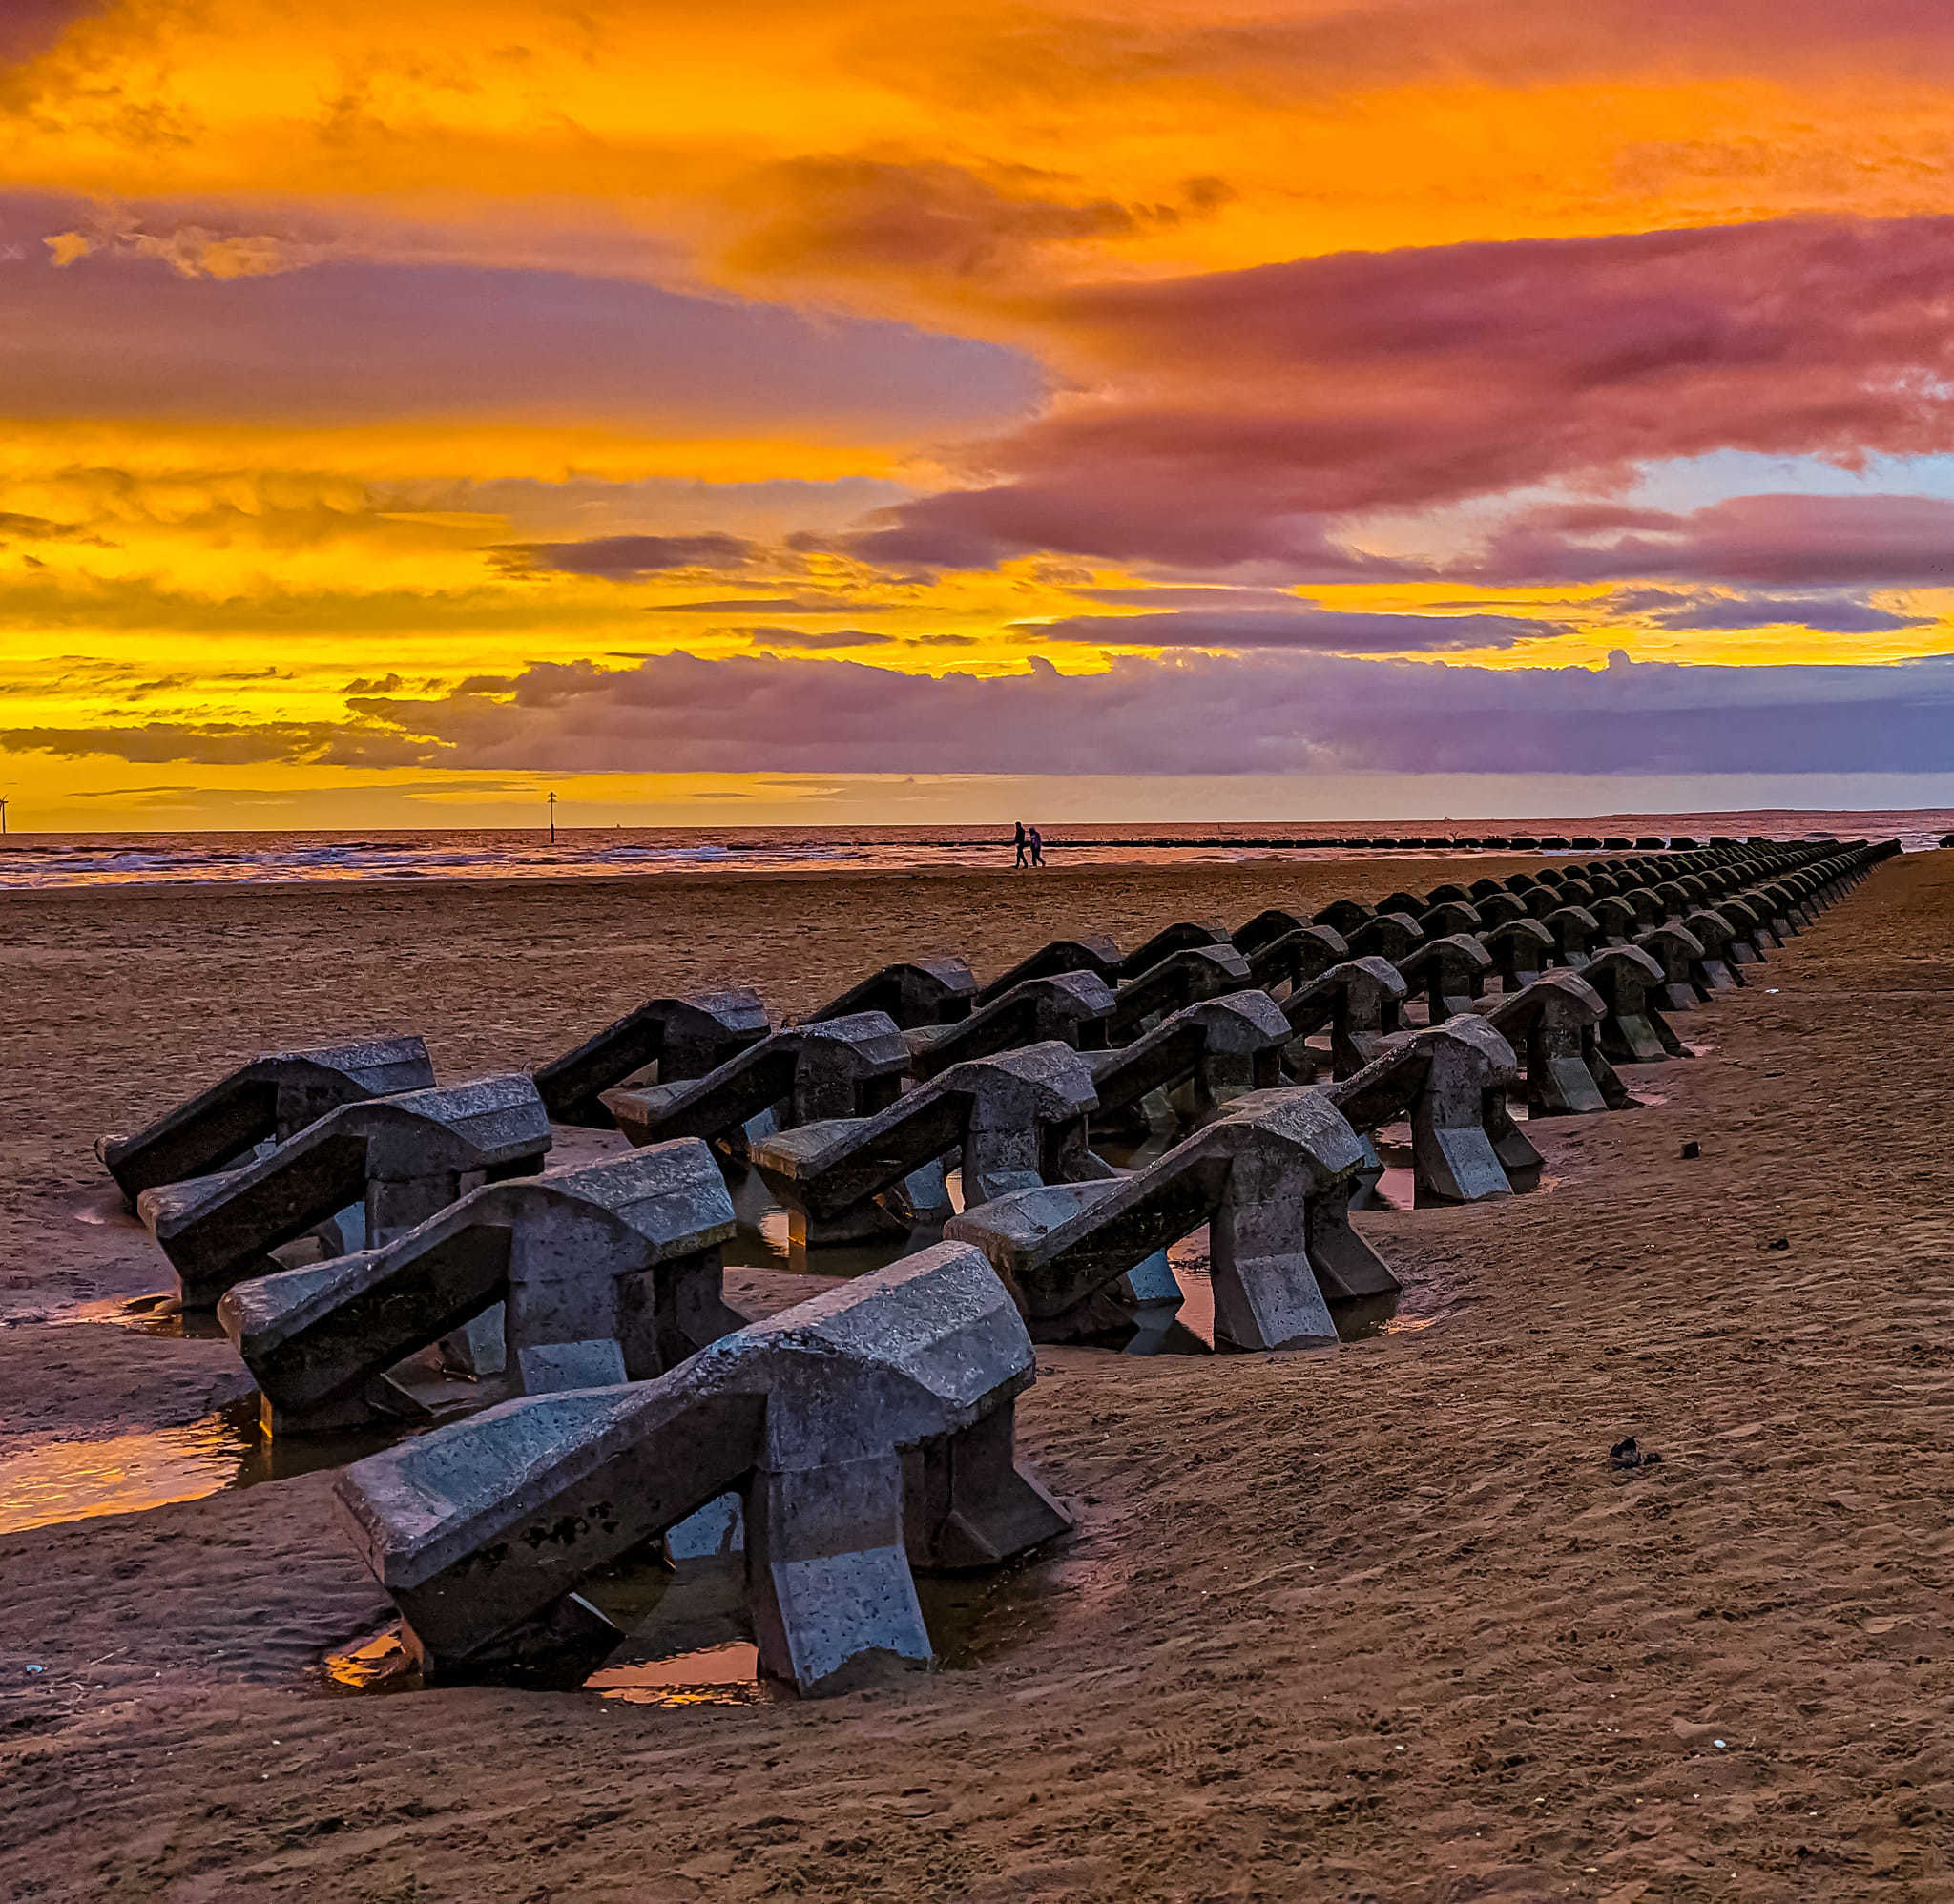 Colourful skies over Wallasey beach by Kimberley Phillips